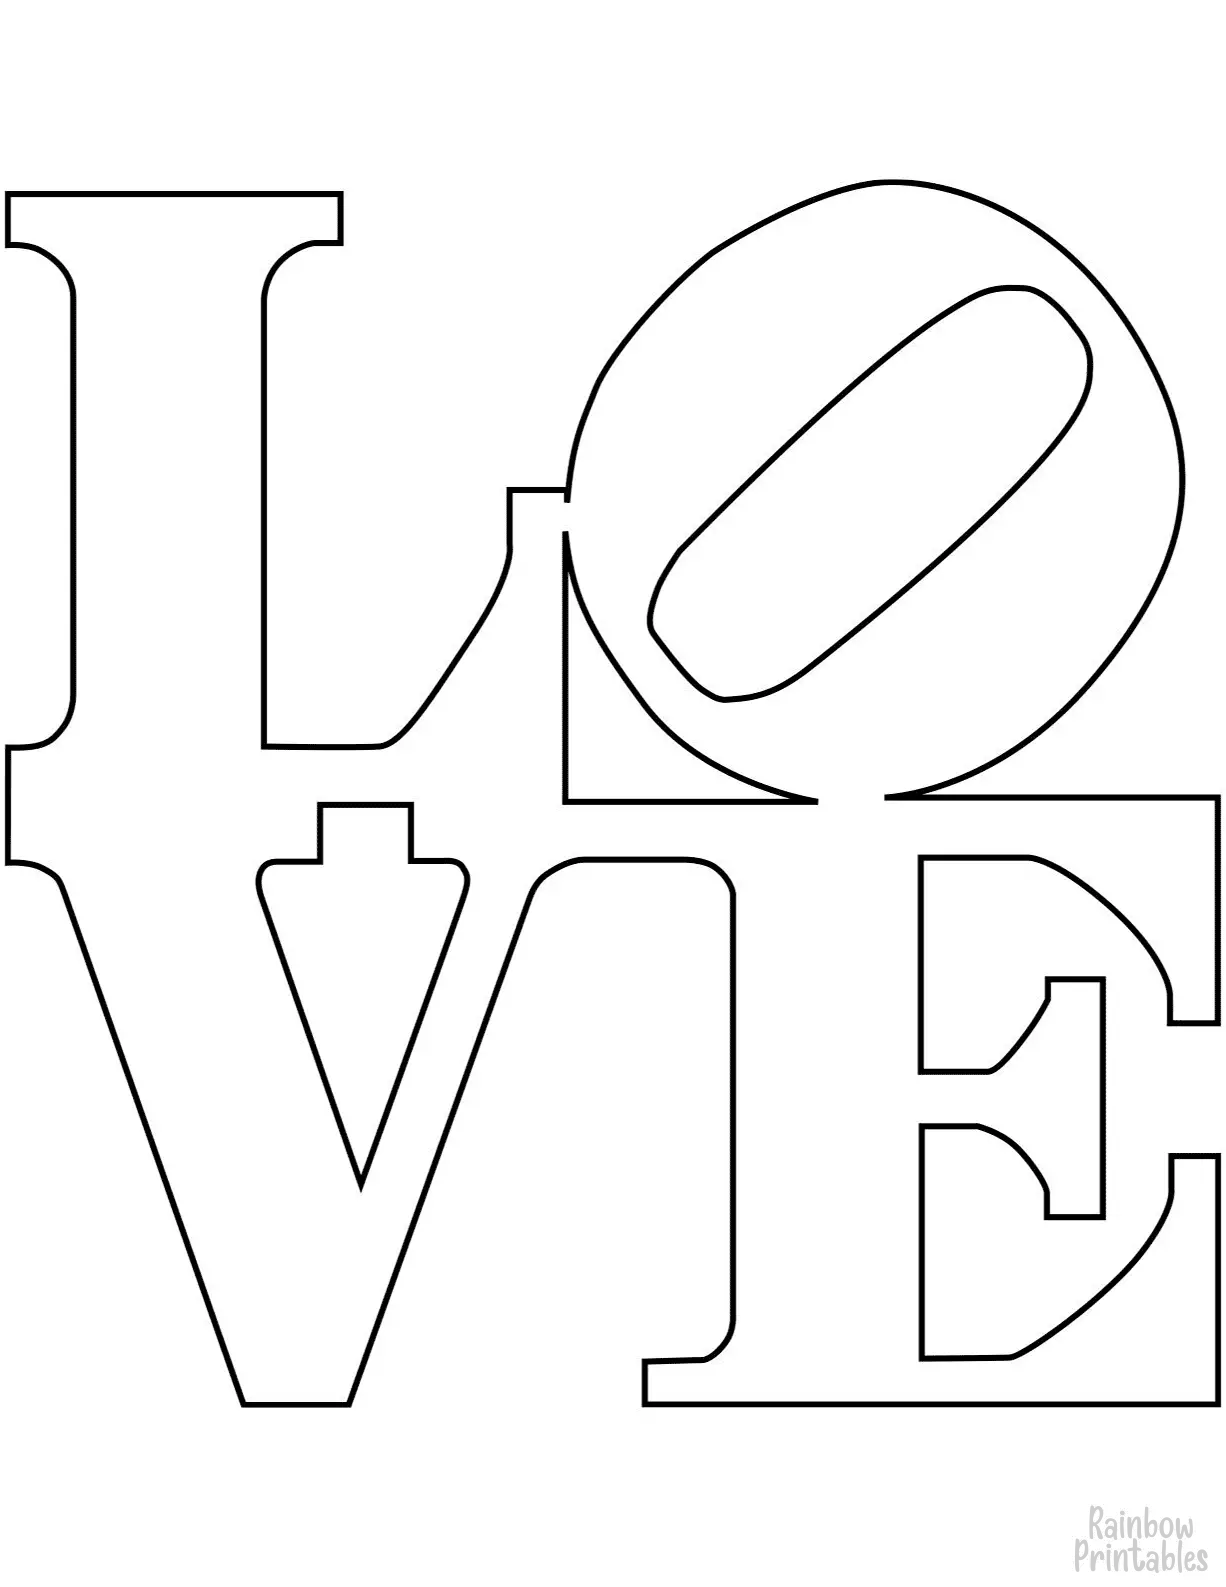 Vday Robert Indiana LOVE Art Clipart Coloring Pages for Kids Adults Art Activities Line Art-15